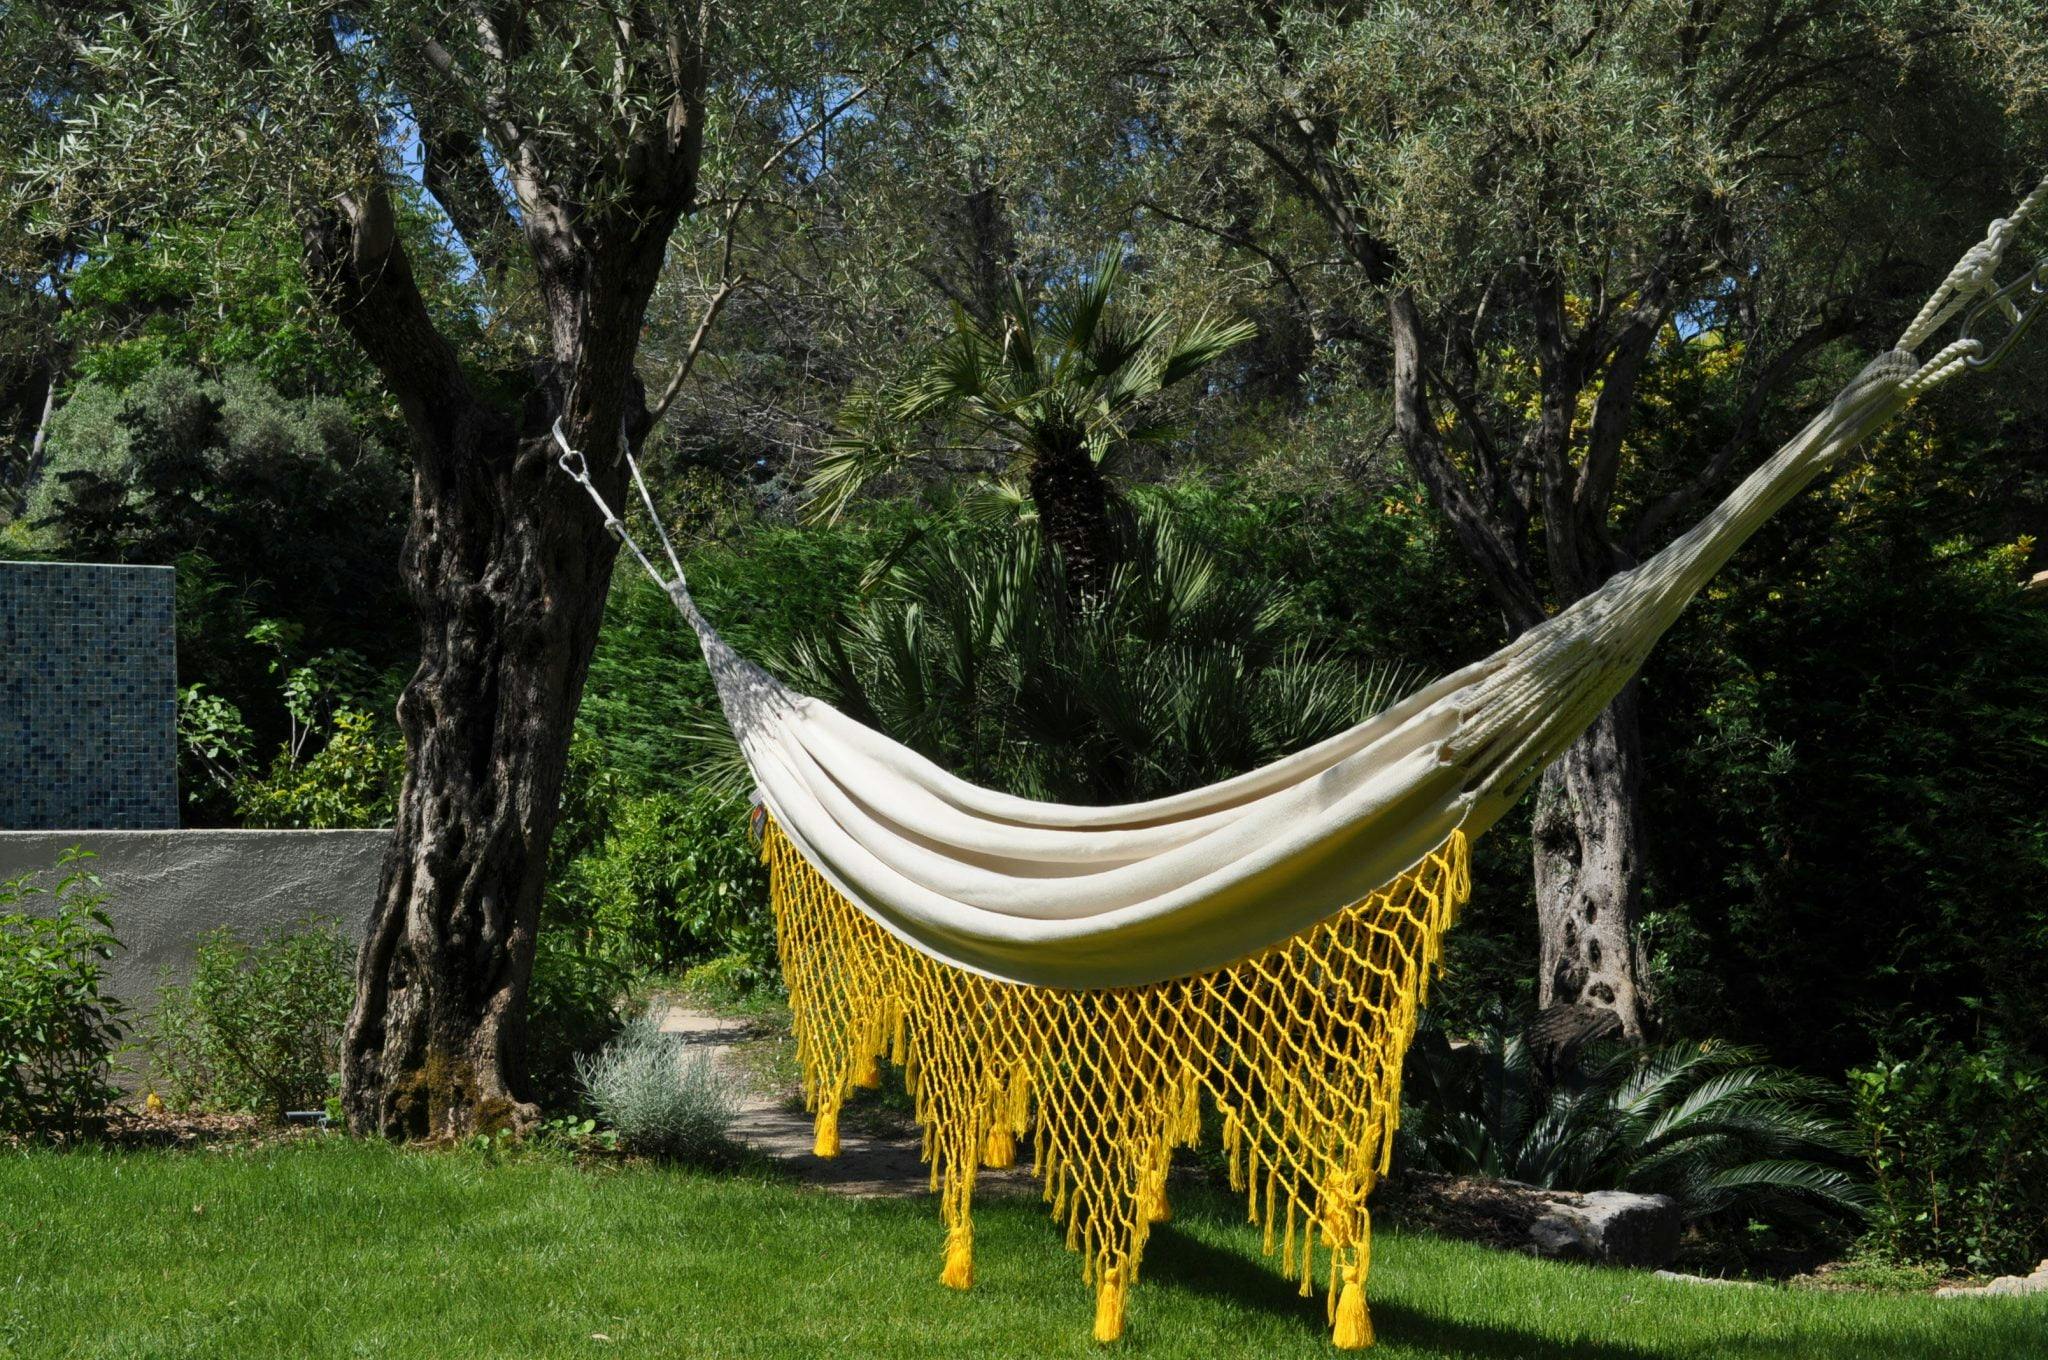 Hammock with yellow net suspended between two tree trunks in the garden, above the green lawn